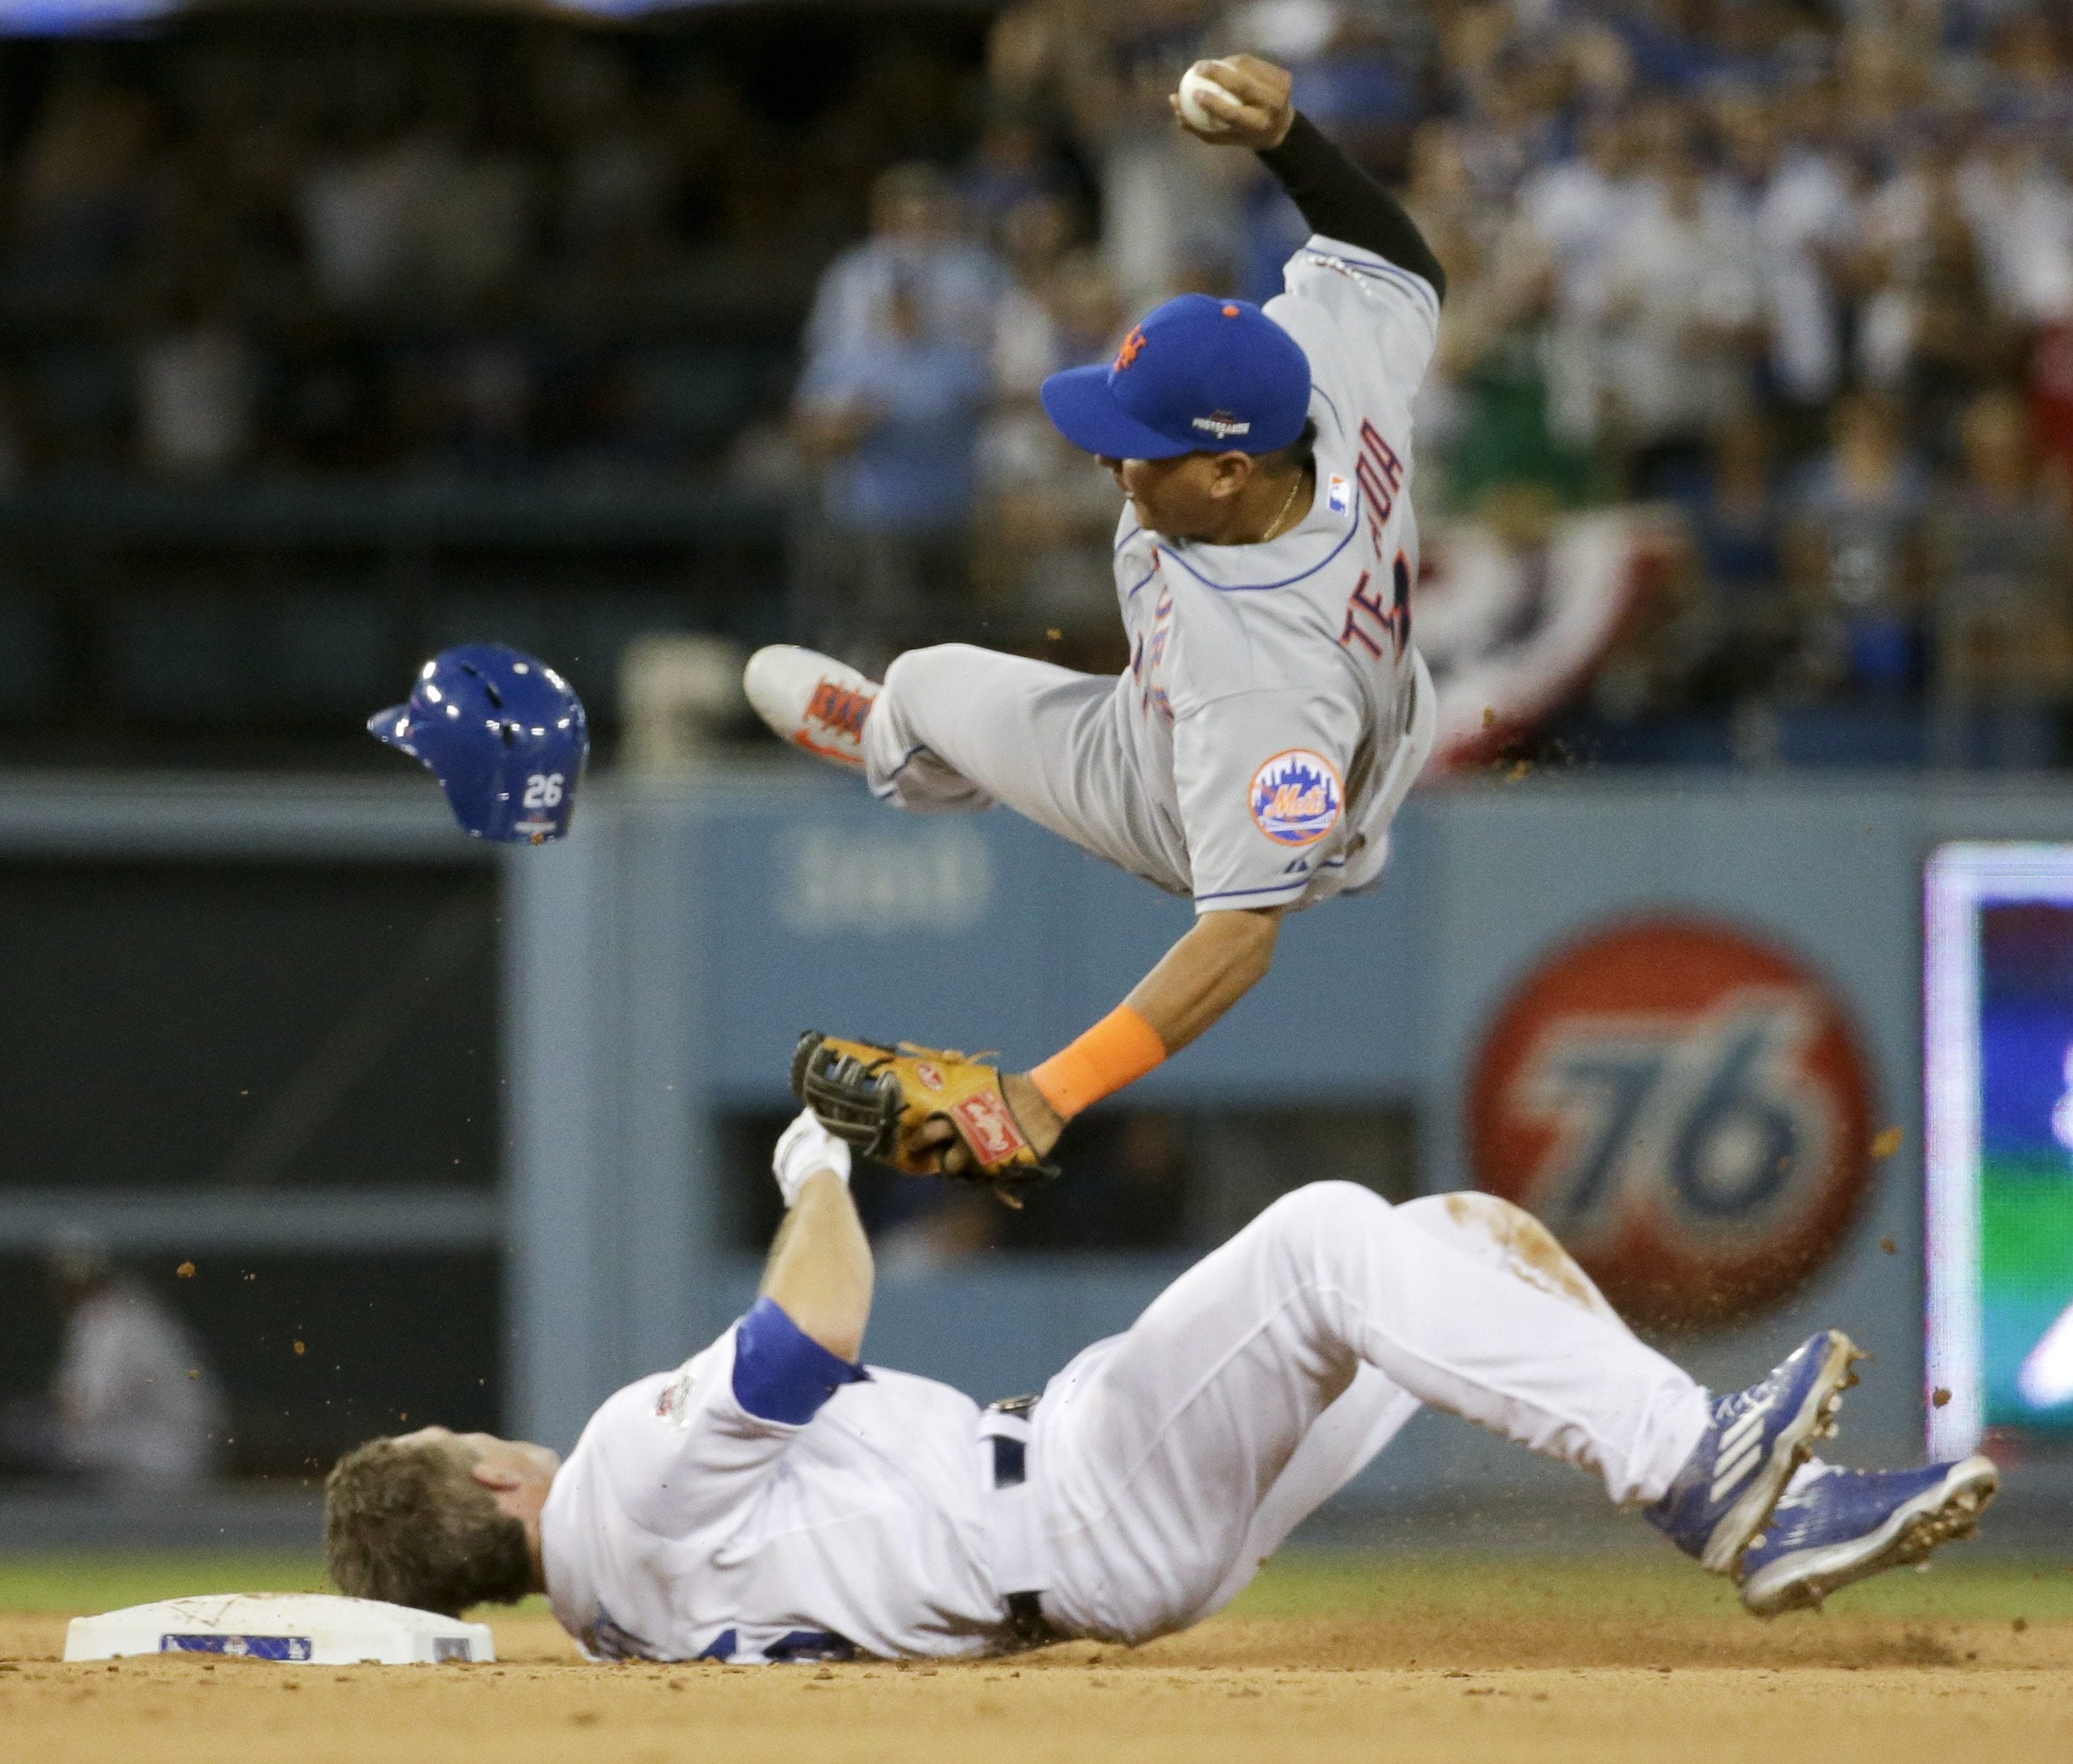 New York Mets shortstop Ruben Tejada, goes over the top of Los Angeles Dodgers' Chase Utley who broke up a double play during the seventh inning in Game 2 of baseball's National League Division Series, in Los Angeles on Oct. 10, 2015. Major League Baseball and the players' association have banned rolling block slides to break up potential double plays, hoping to prevent a repeat of the takeout by Dodgers' Chase Utley that broke a leg of Mets Ruben Tejada in last years playoffs. Under the rules change announced Thursday, Feb. 25, 2016, a runner must make a "bona fide slide," defined as making contact with the ground ahead of the base, being in position to reach the base with a hand or foot and to remain on it, and sliding within reach of the base without changing his path to initiate contact with a fielder.